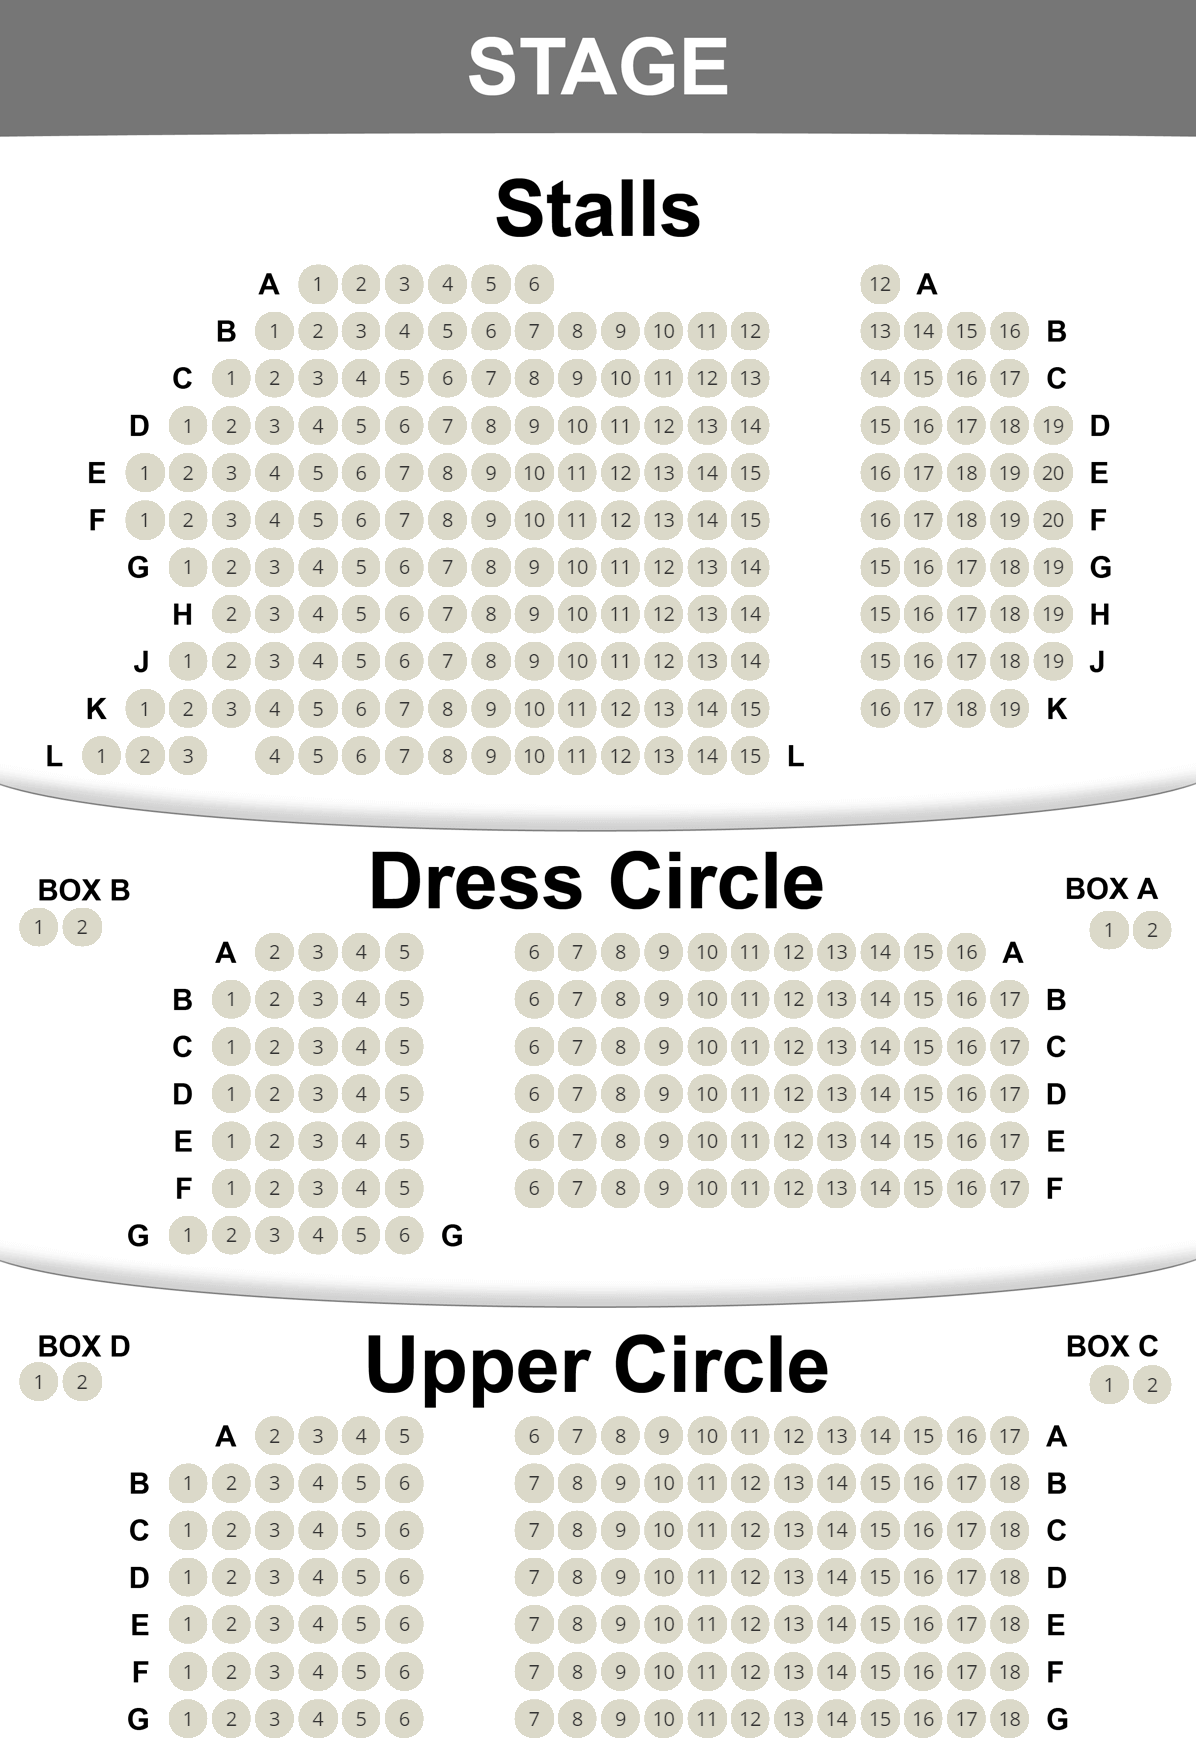 Gielgud Theatre Seating Plan: Best Seats, Real-Time Pricing & Reviews